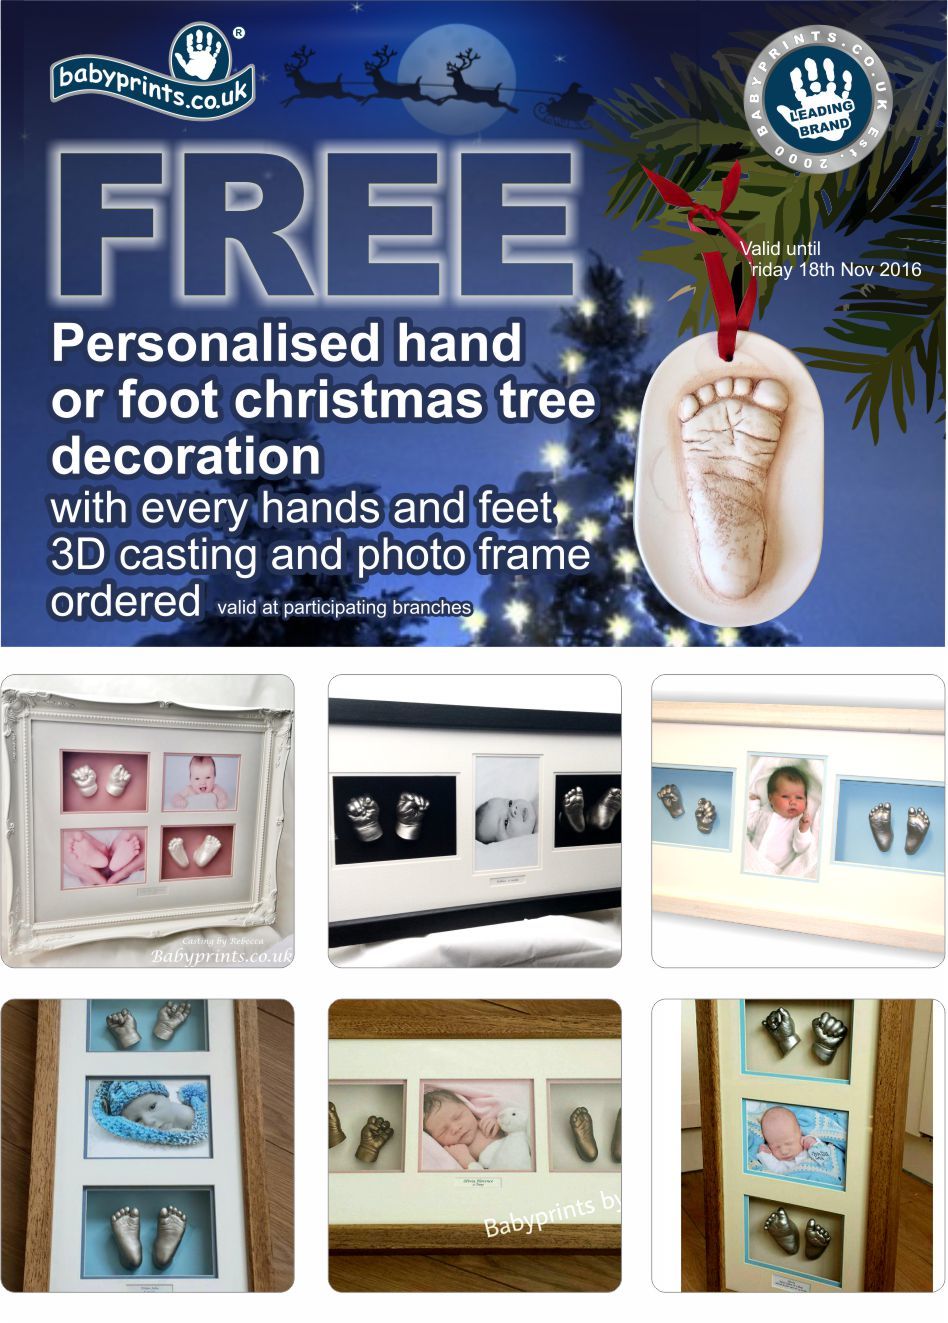 FREE Christmas gift from Babyprints